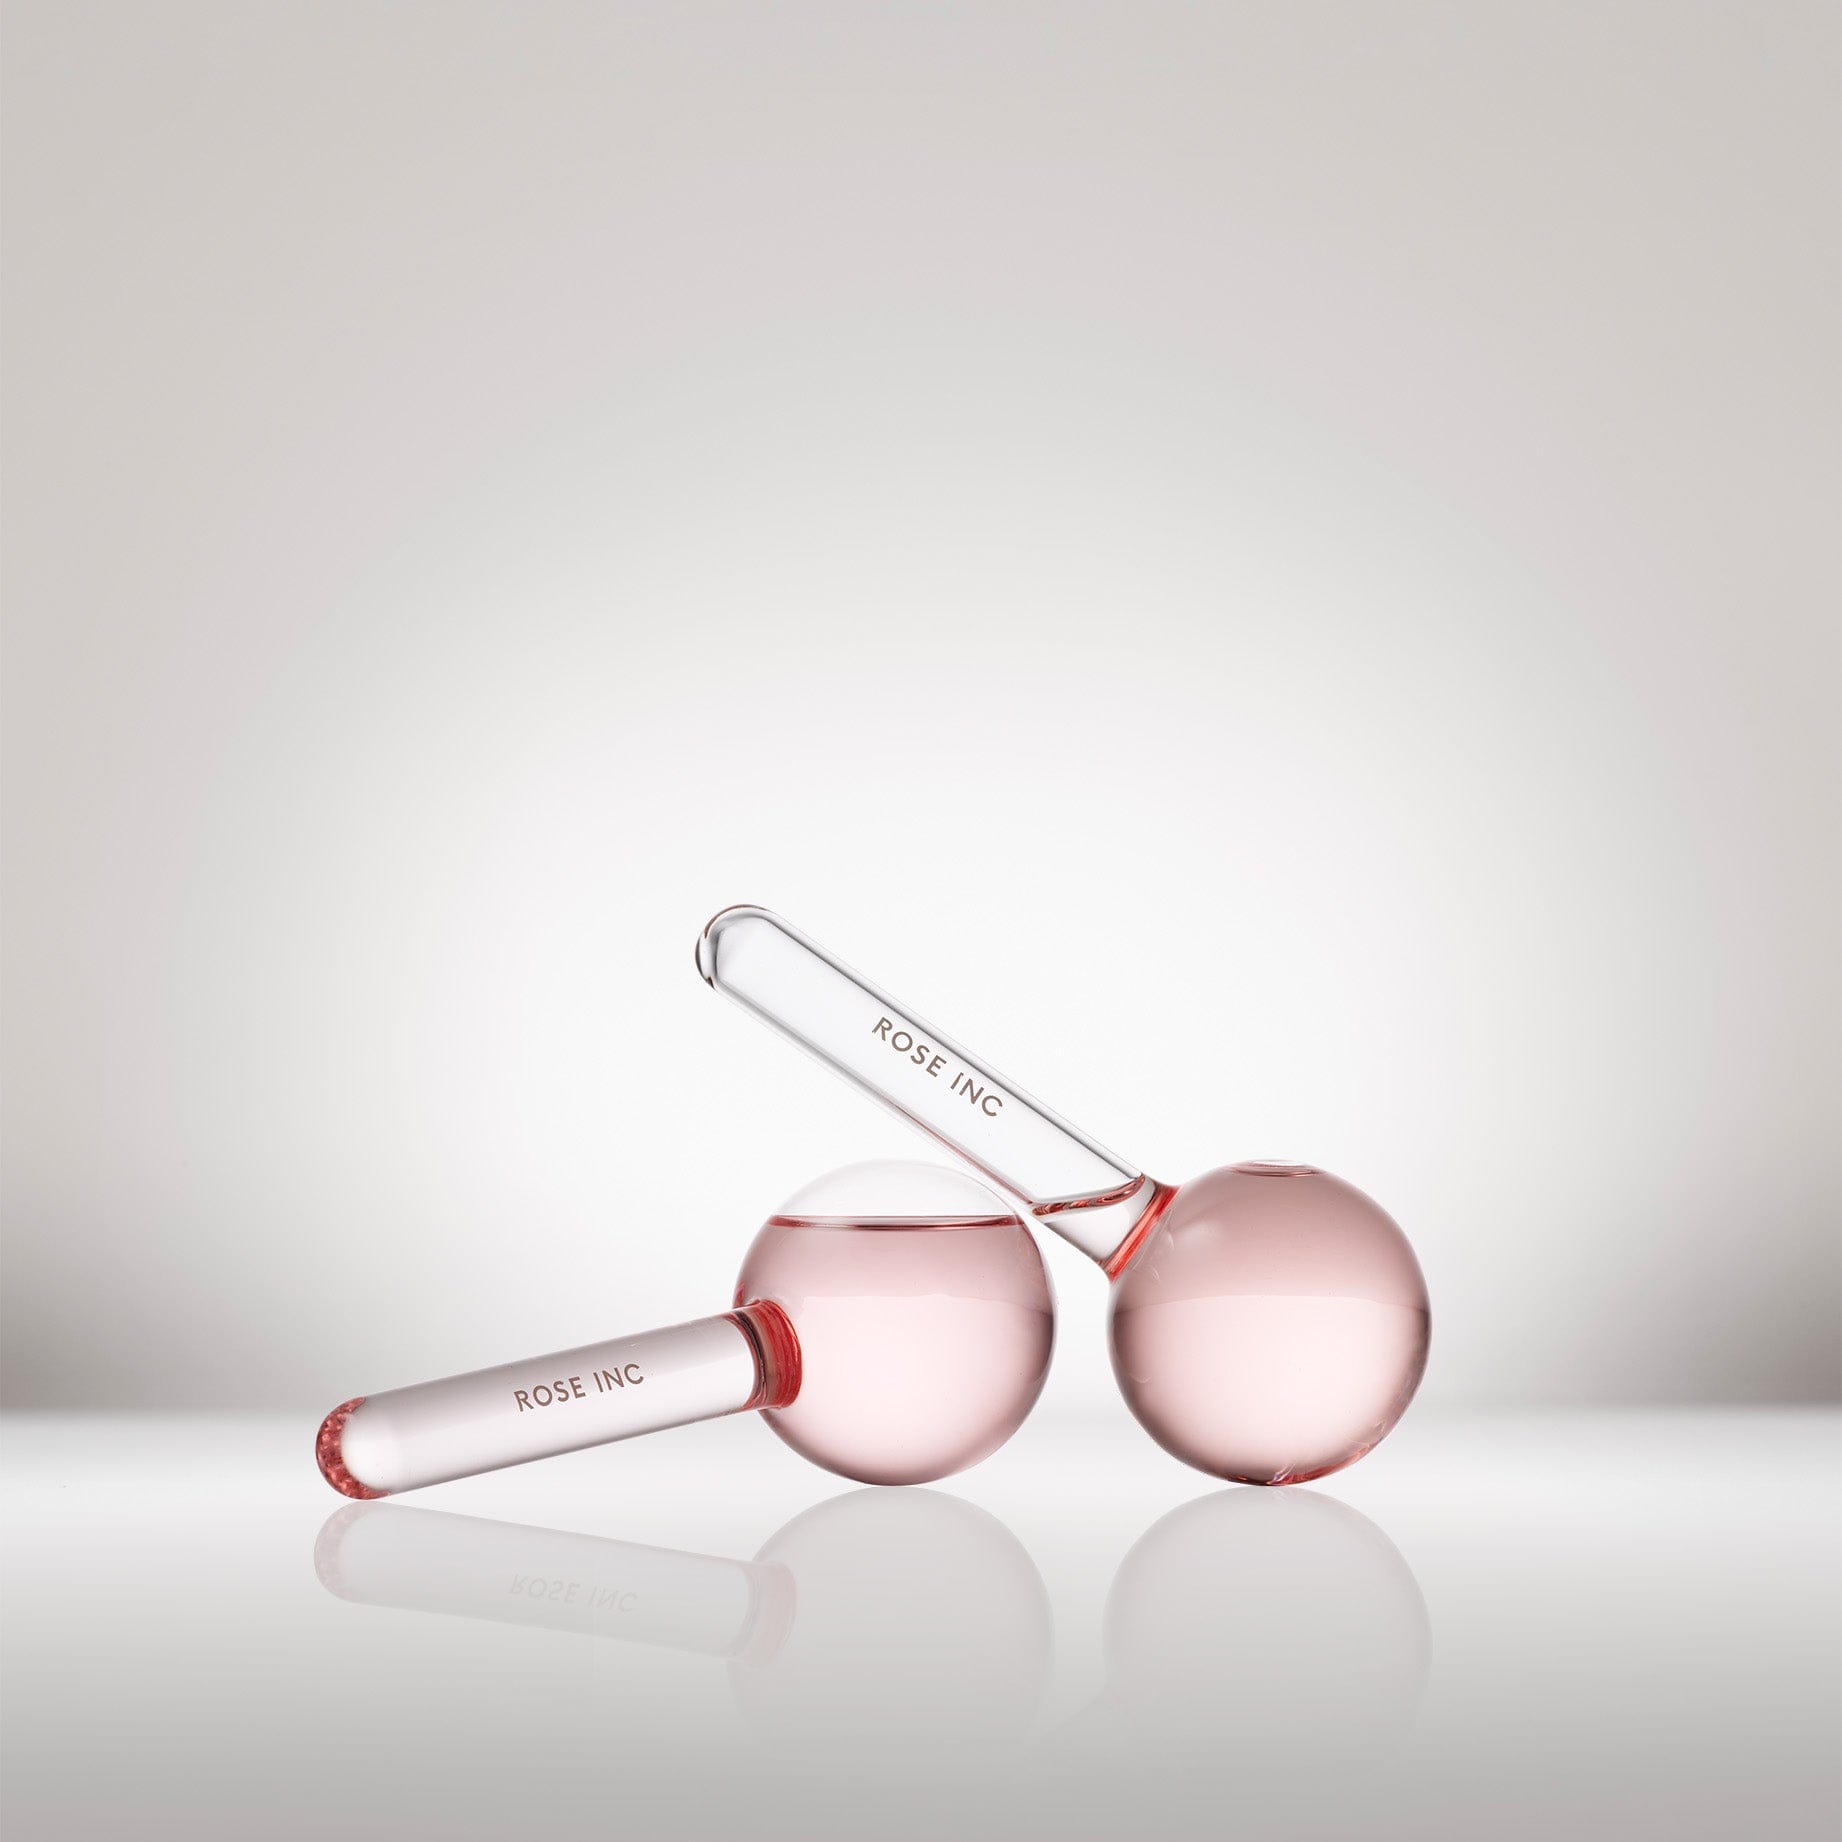 Cooling Spheres from Rose Inc